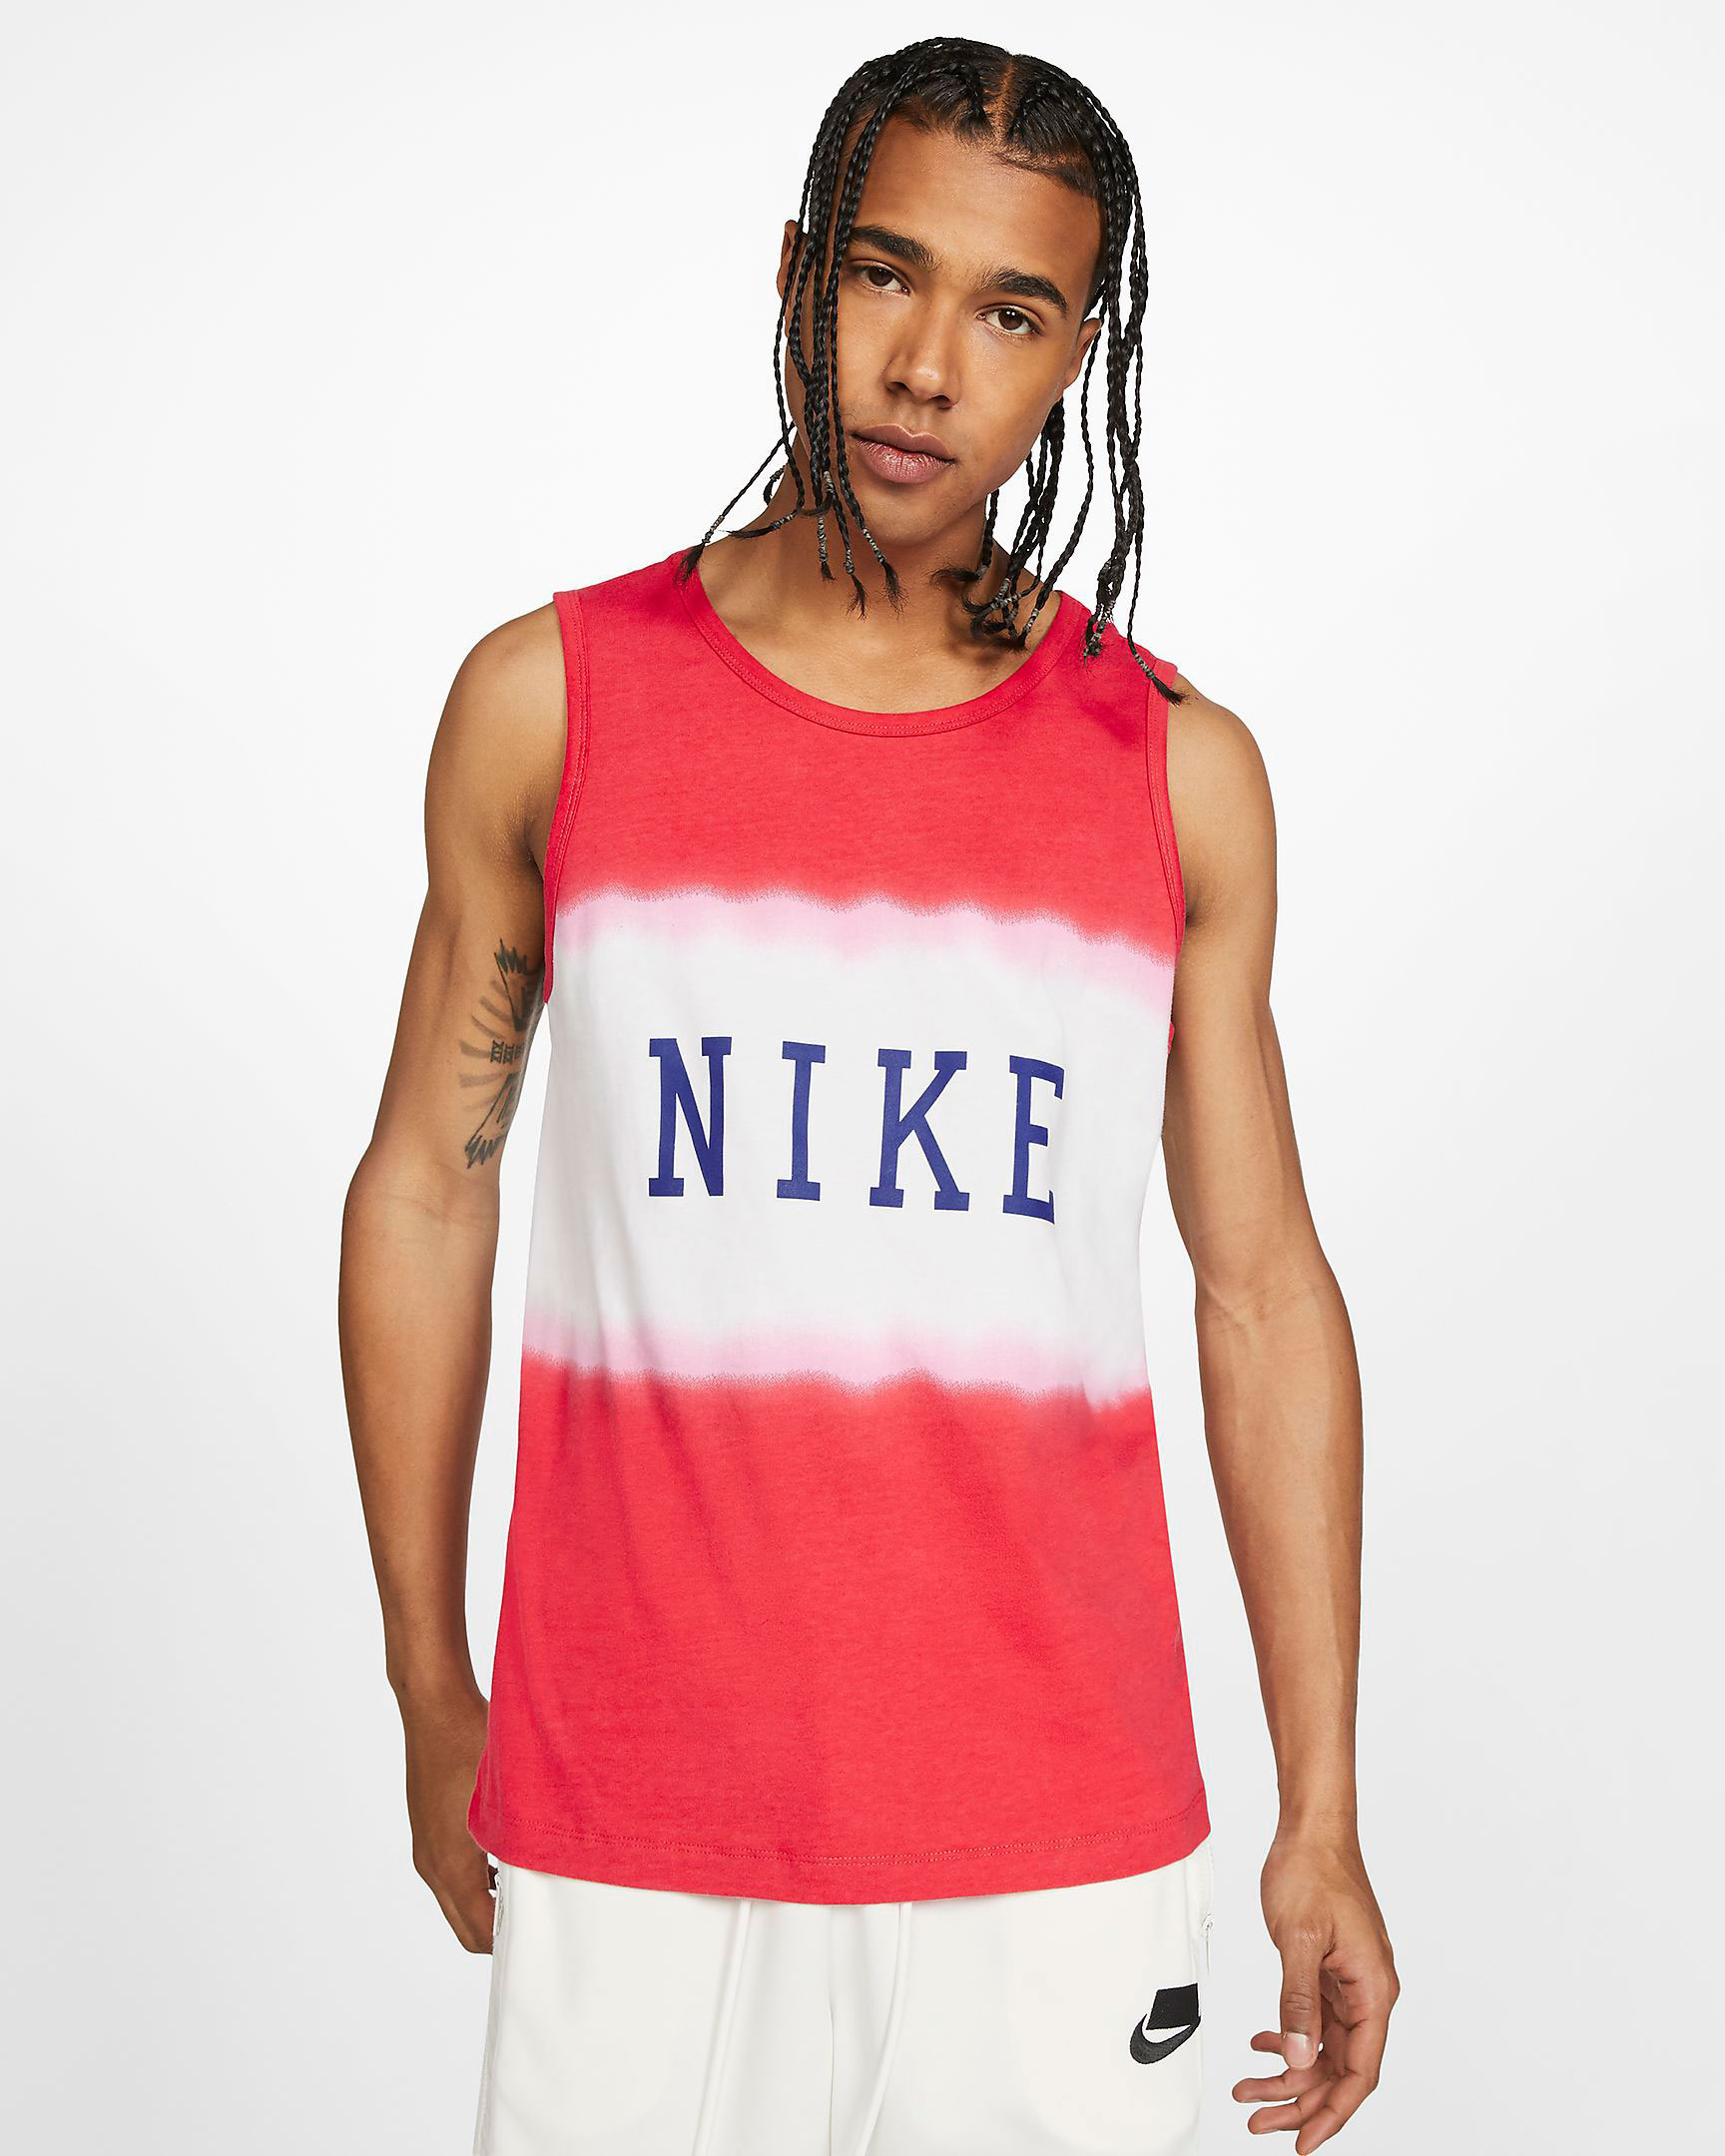 nike-kybrid-s2-what-the-usa-tank-top-1